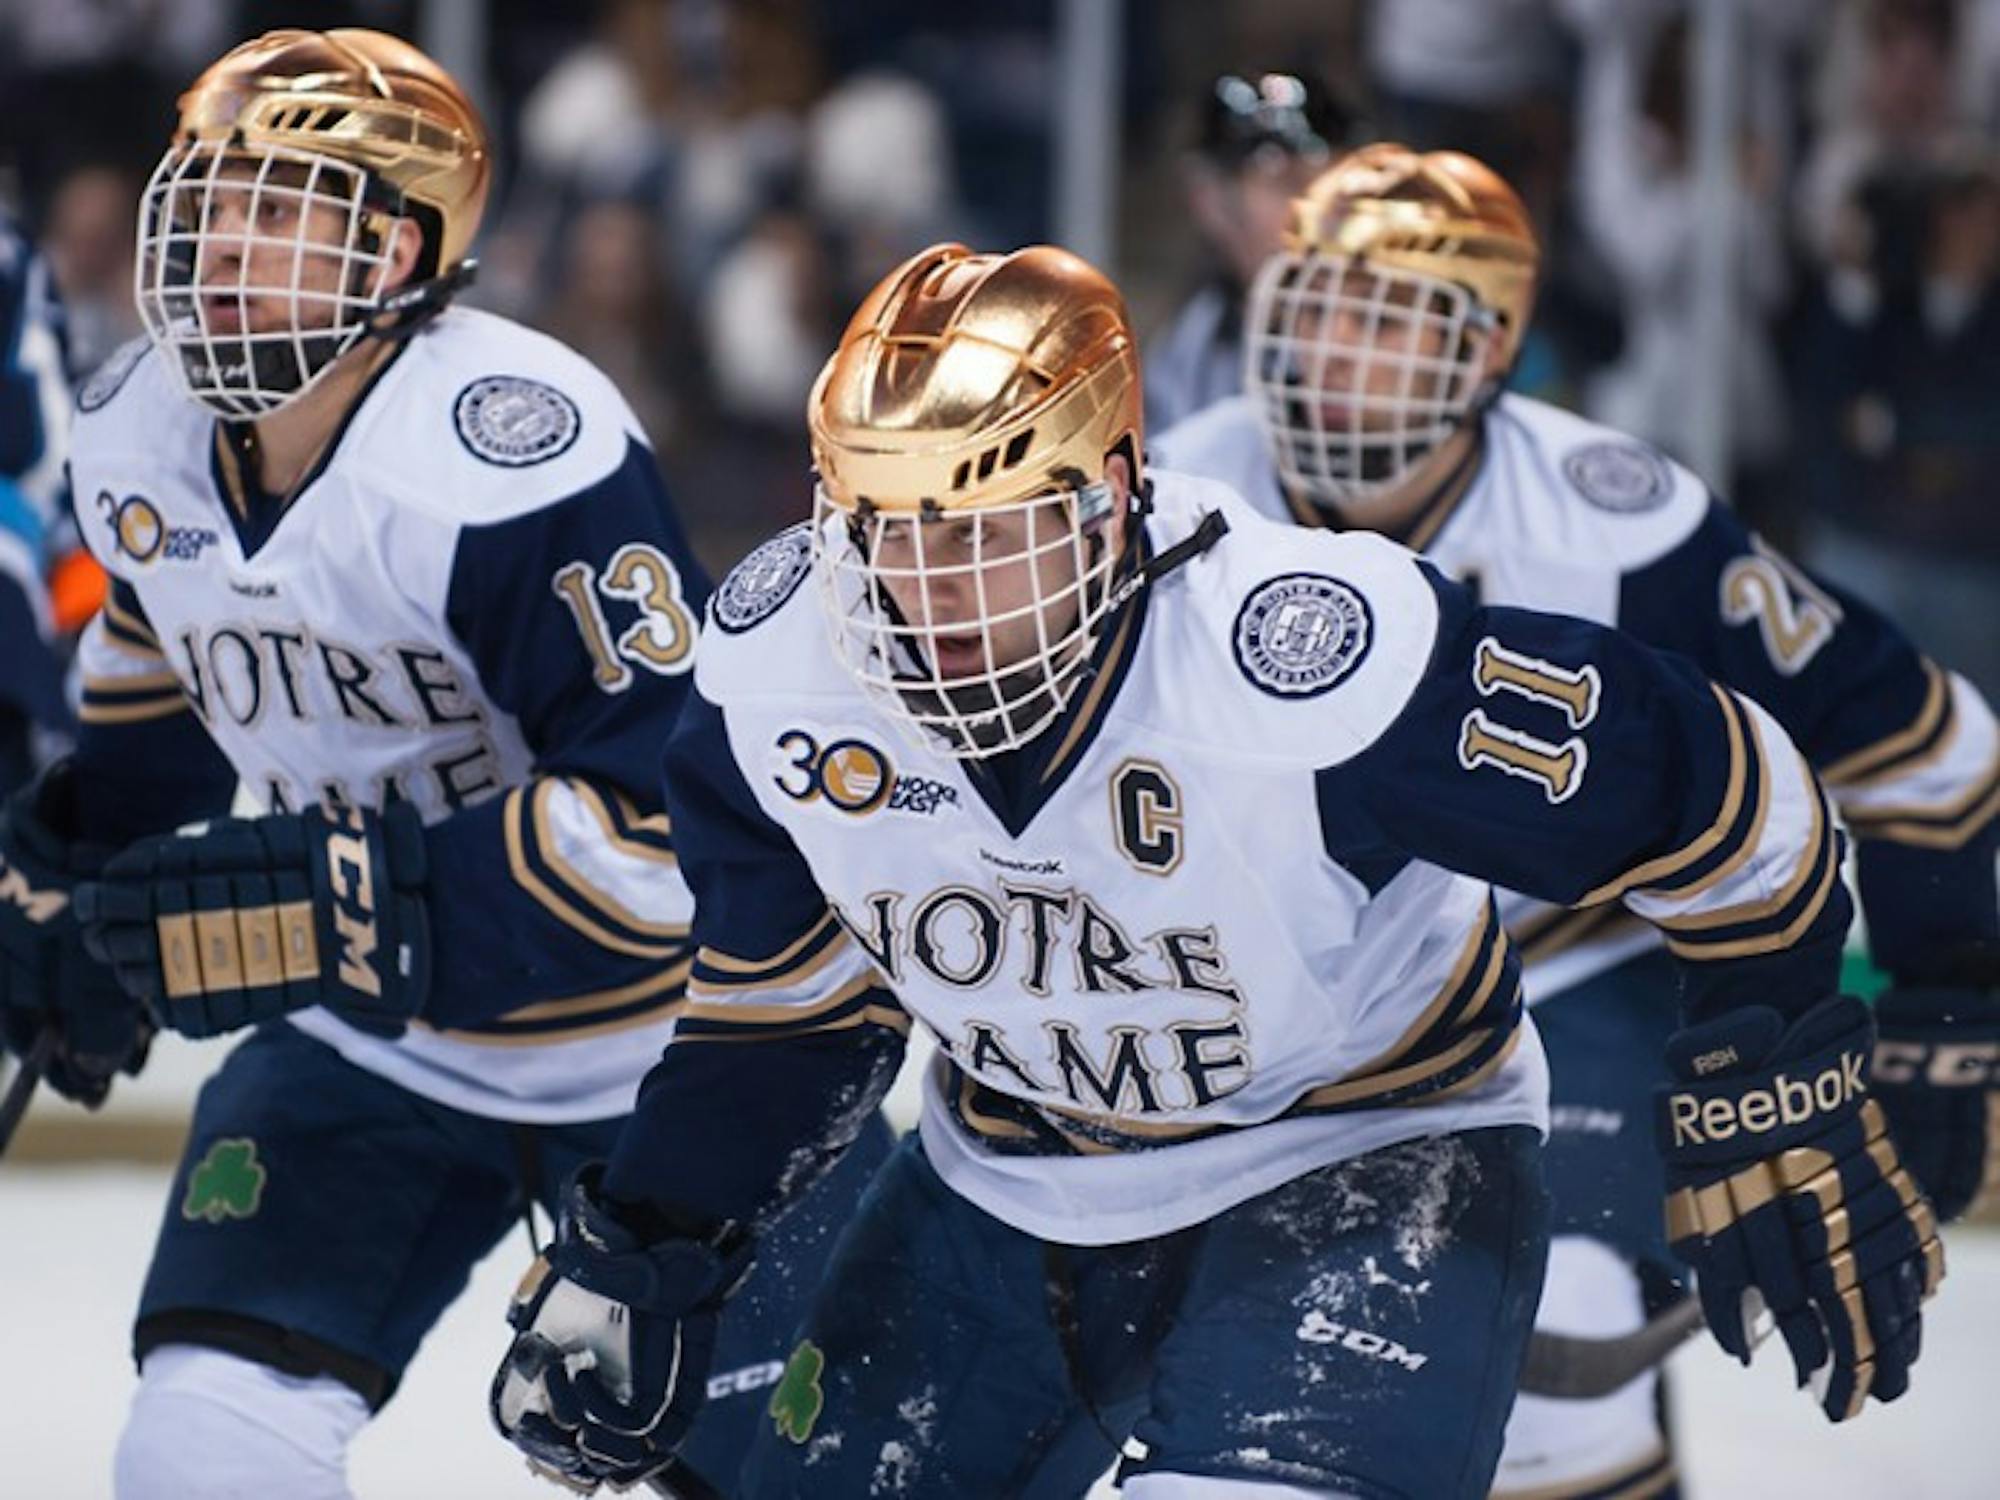 Irish senior left wing Jeff Costello skates ahead in Notre Dame’s 2-1 loss to Maine on Feb. 2. The captain scored a goal against Boston University on Saturday.